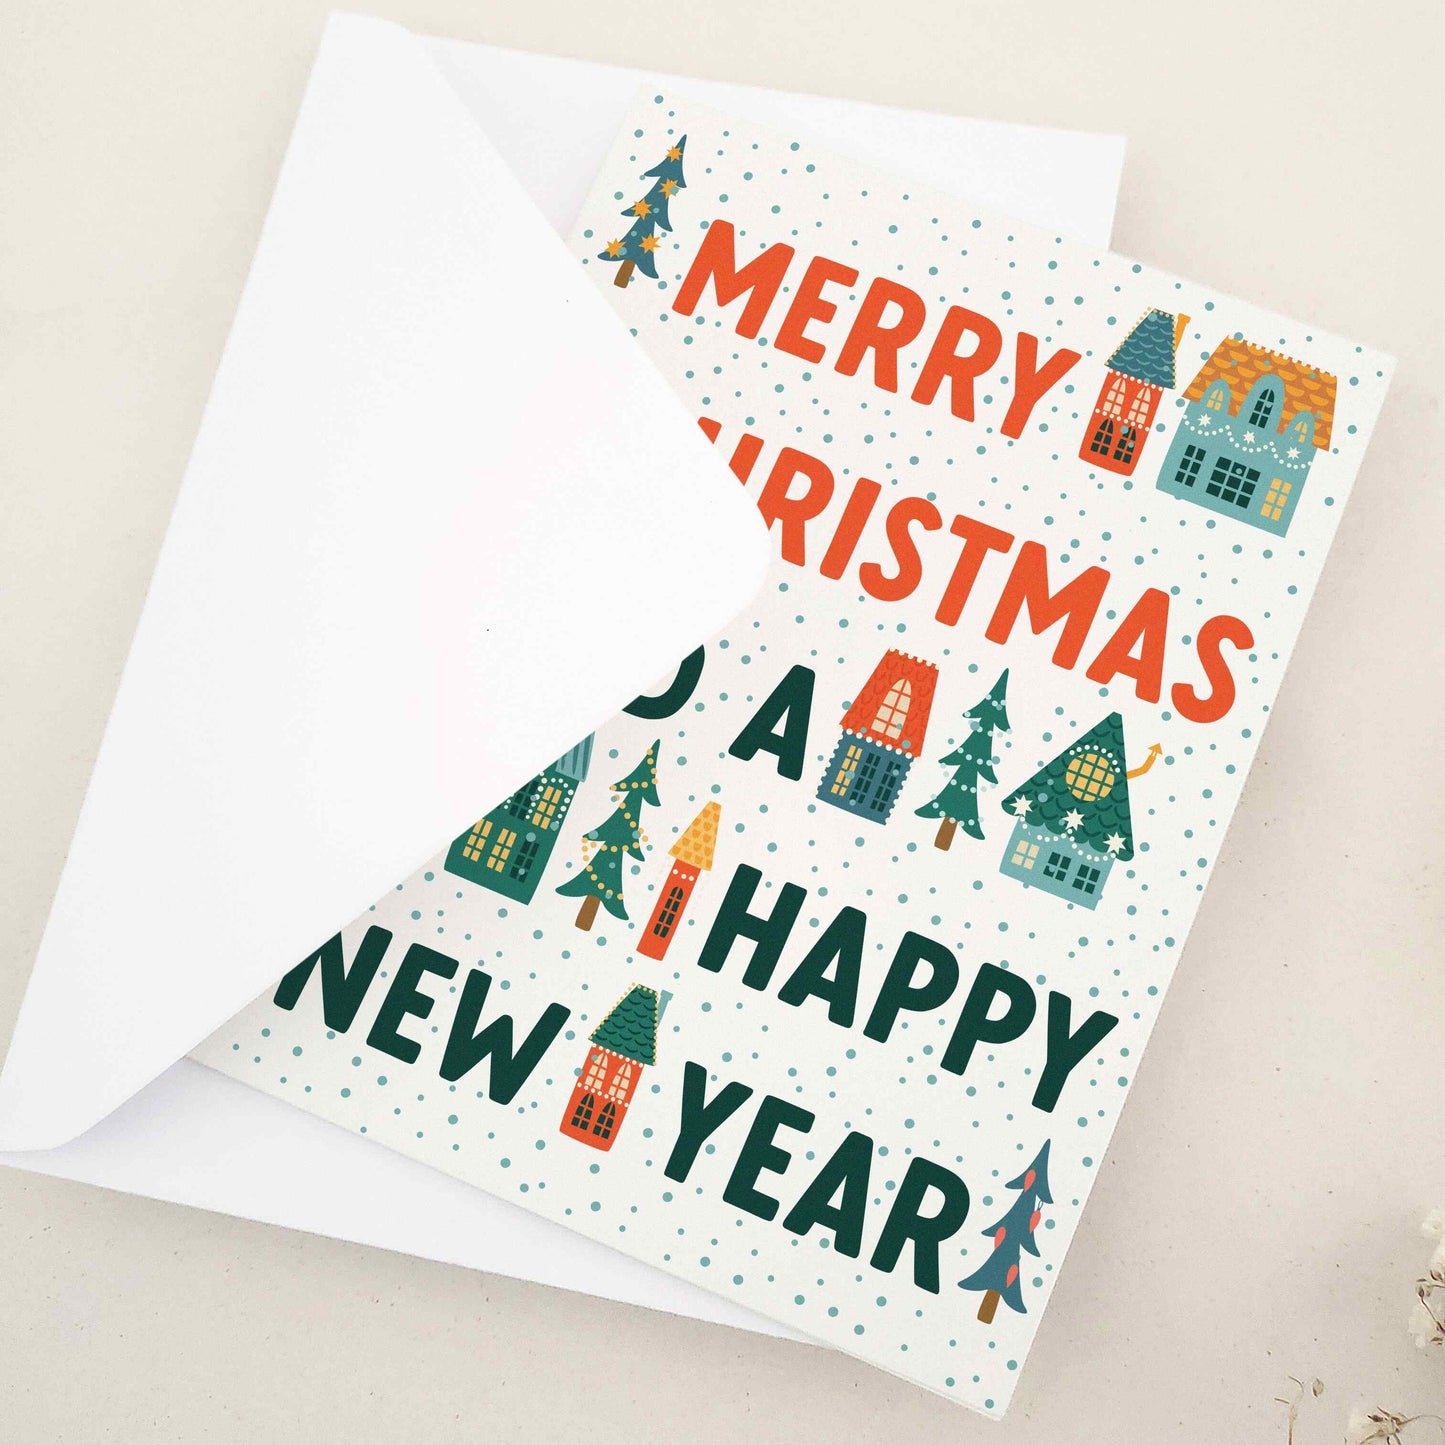 Merry Christmas and a Happy New Year card by XOXOKristen, featuring a picturesque winter village scene with quaint houses and evergreen trees, adorned with vivid colors and whimsical imagery, embodying festive cheer and hopeful spirit.